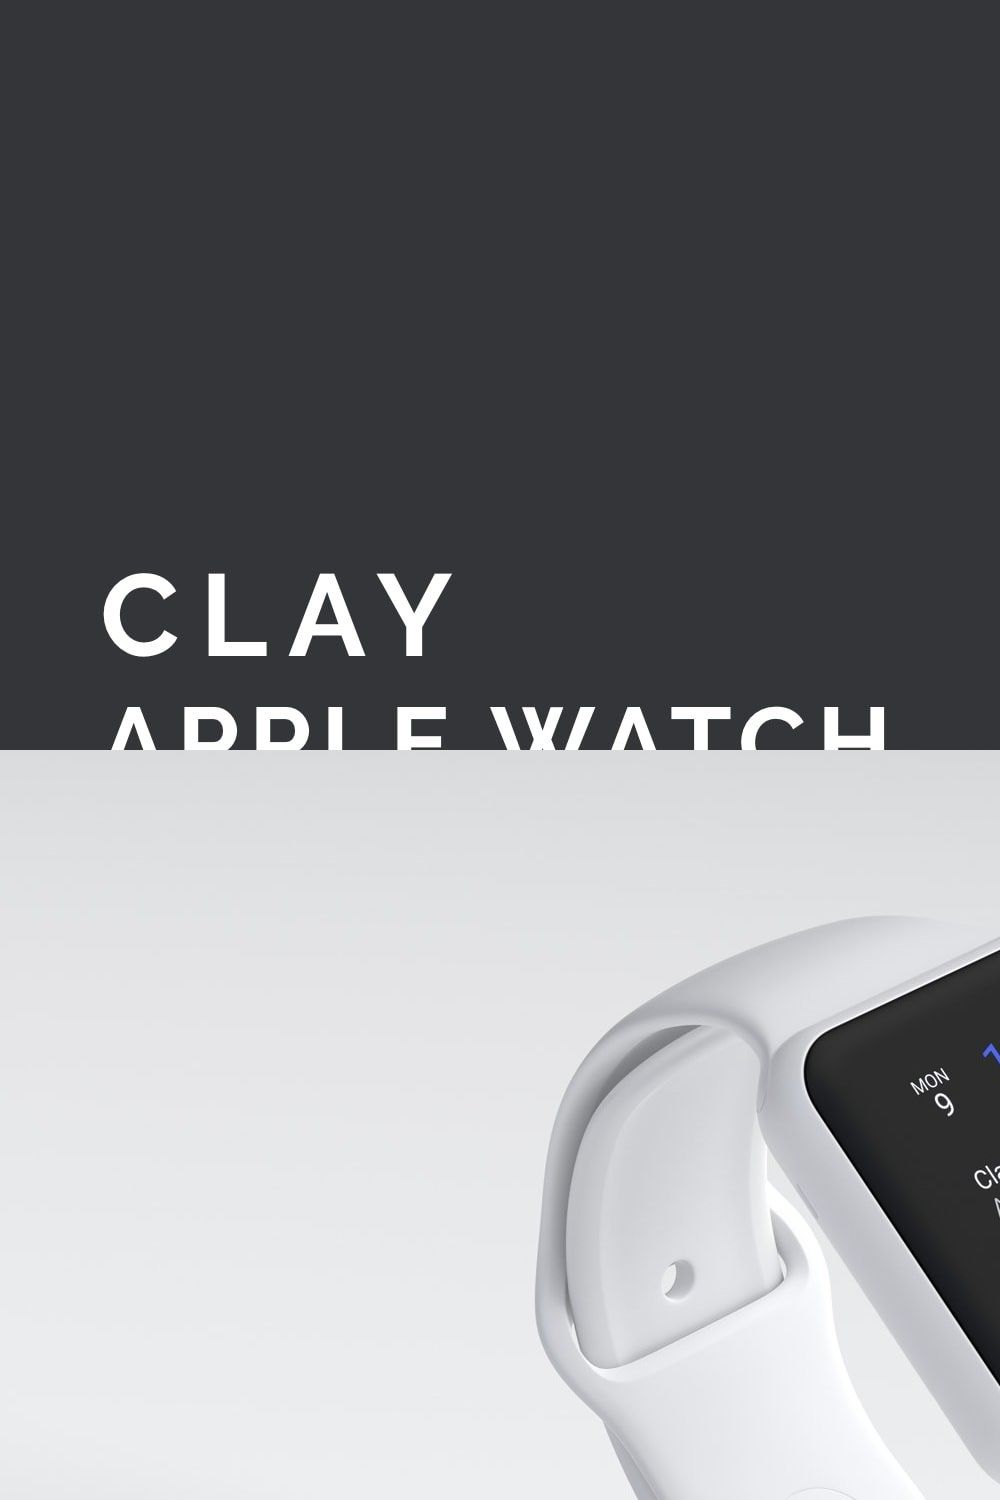 Clay Apple Watch Mockups Pack 01 pinterest preview image.